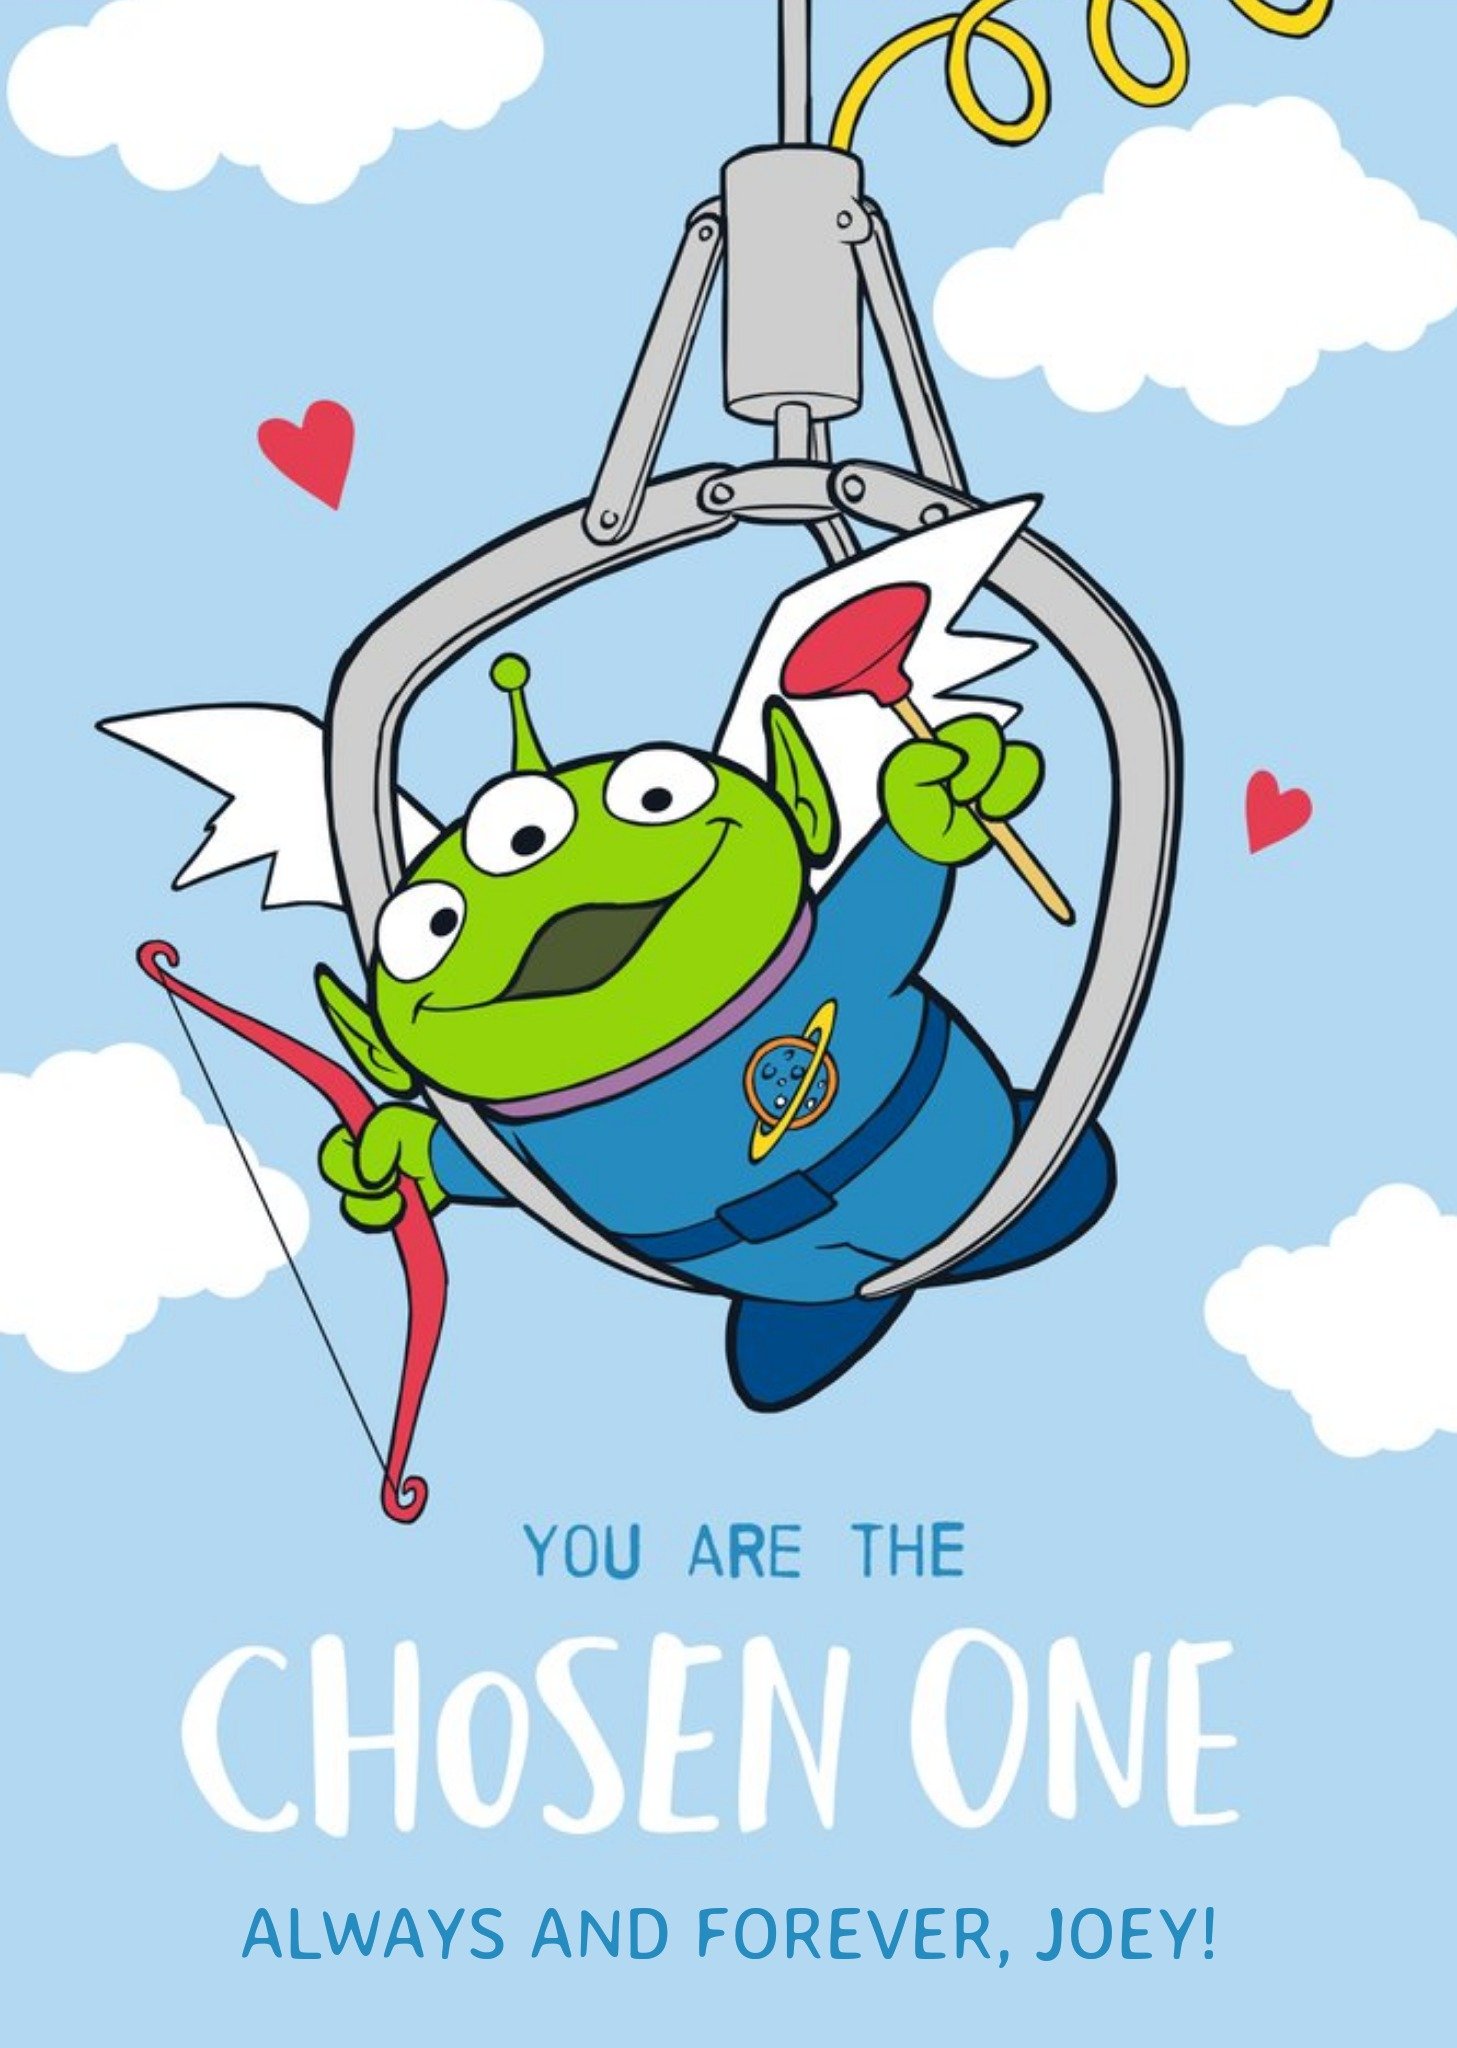 Toy Story Alien Character You Are The Chosen One Anniversary Card, Large